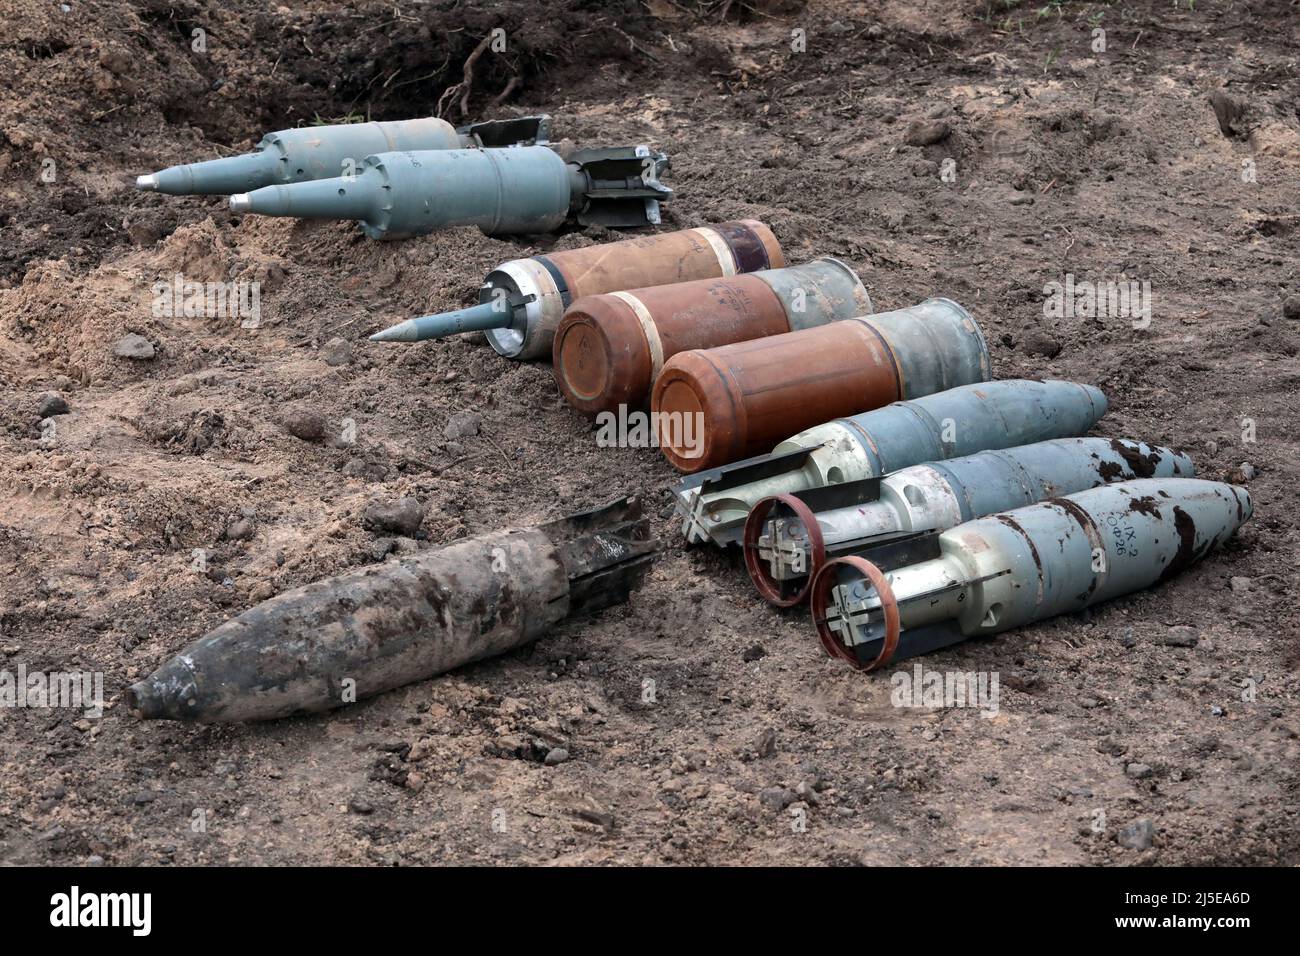 KYIV REGION, UKRAINE - APRIL 21, 2022 - Ammunition is arranged on the ground during a mine clearance mission near Bervytsia, a village liberated from Stock Photo